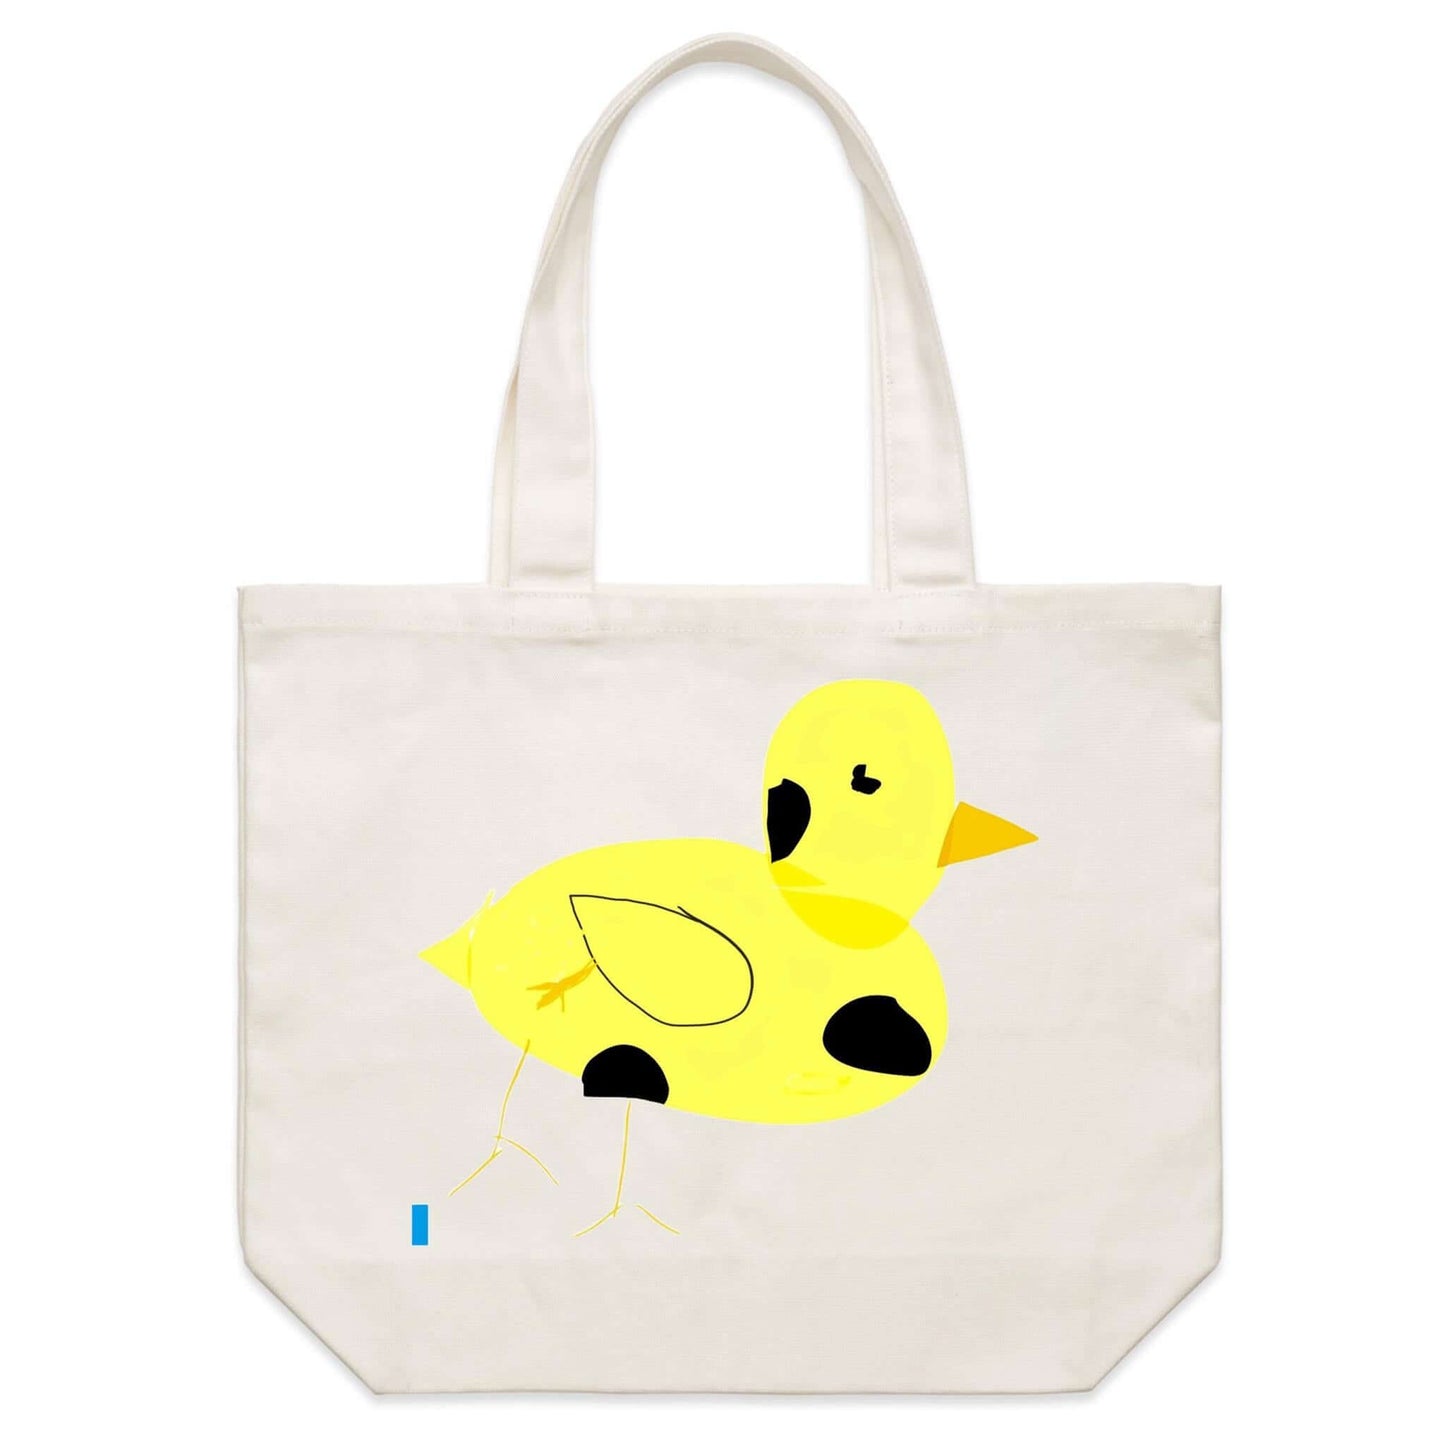 Duckie Bag featuring Myrtle the Four-Legged Chicken by D.B. Print (Myrtle renamed Duckie by D.B.'s little sister) Shoulder Canvas Tote Bag